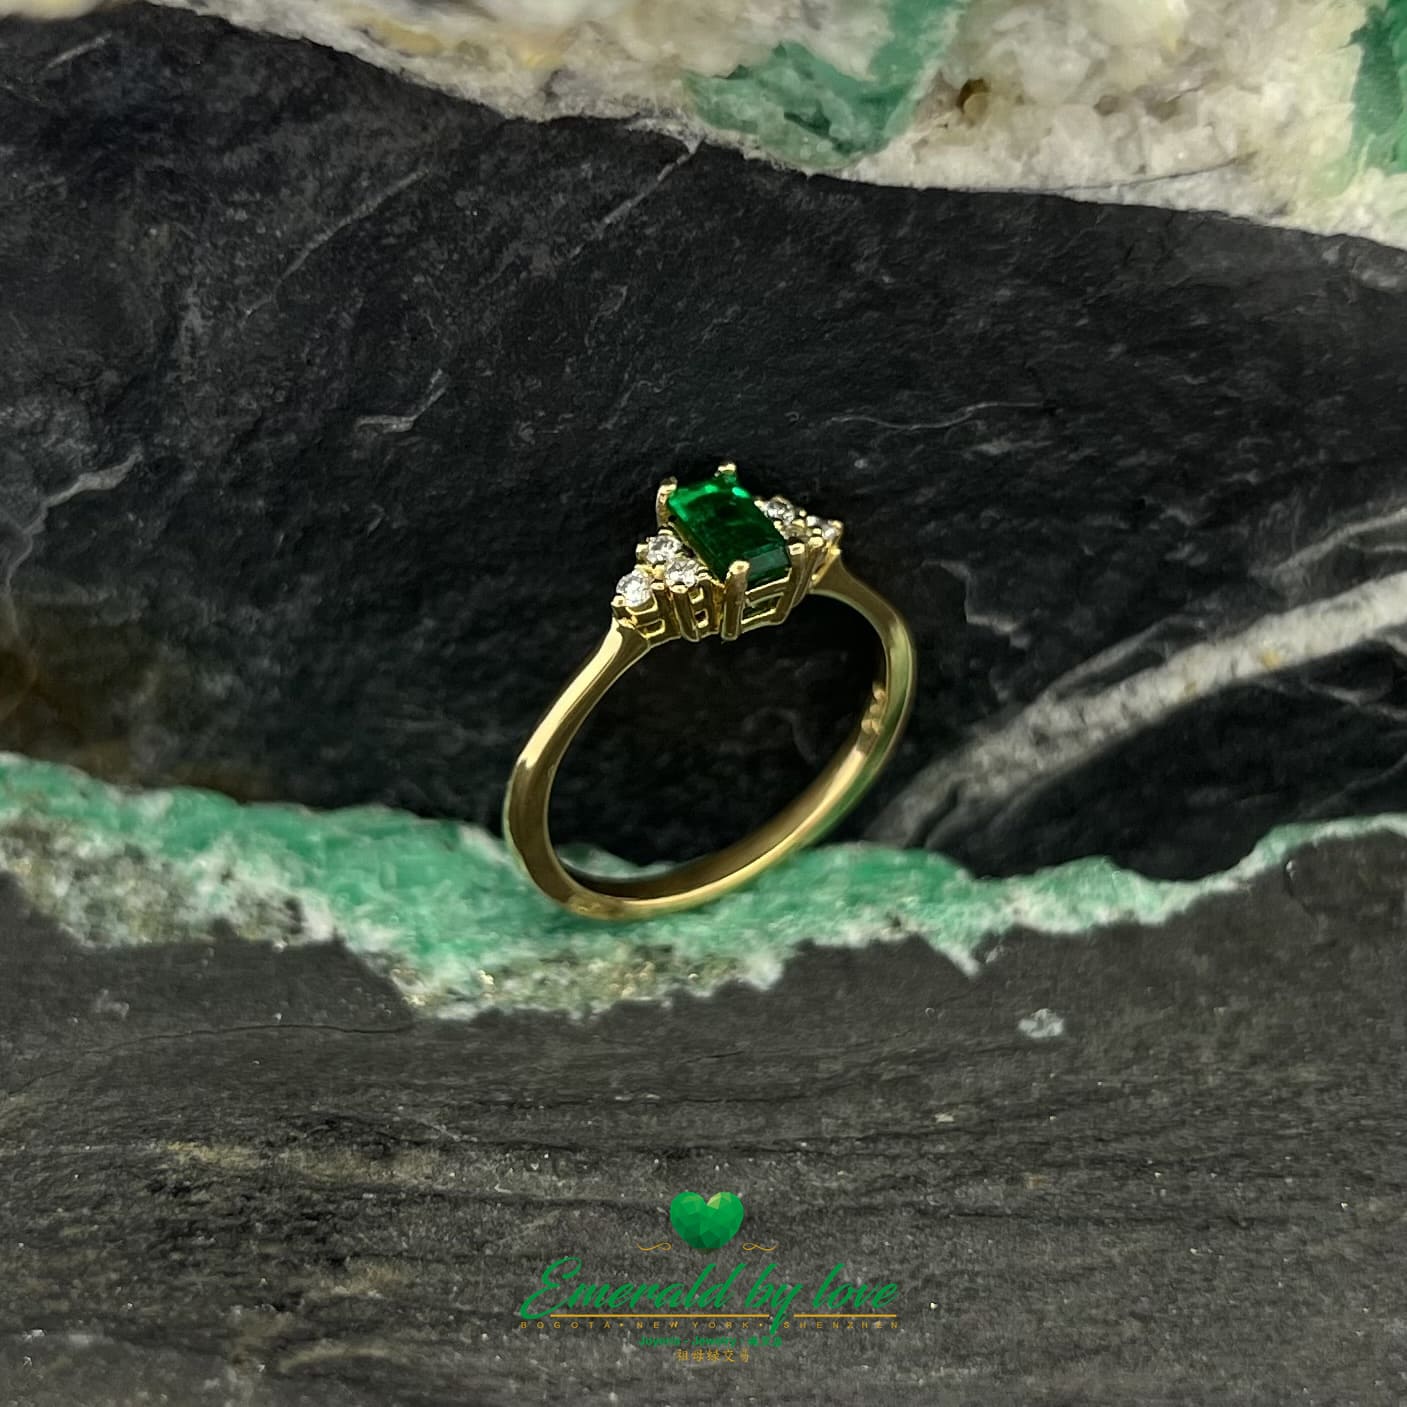 Yellow Gold Ring with Dark Green Baguette Emerald and Three Diamonds on Each Side